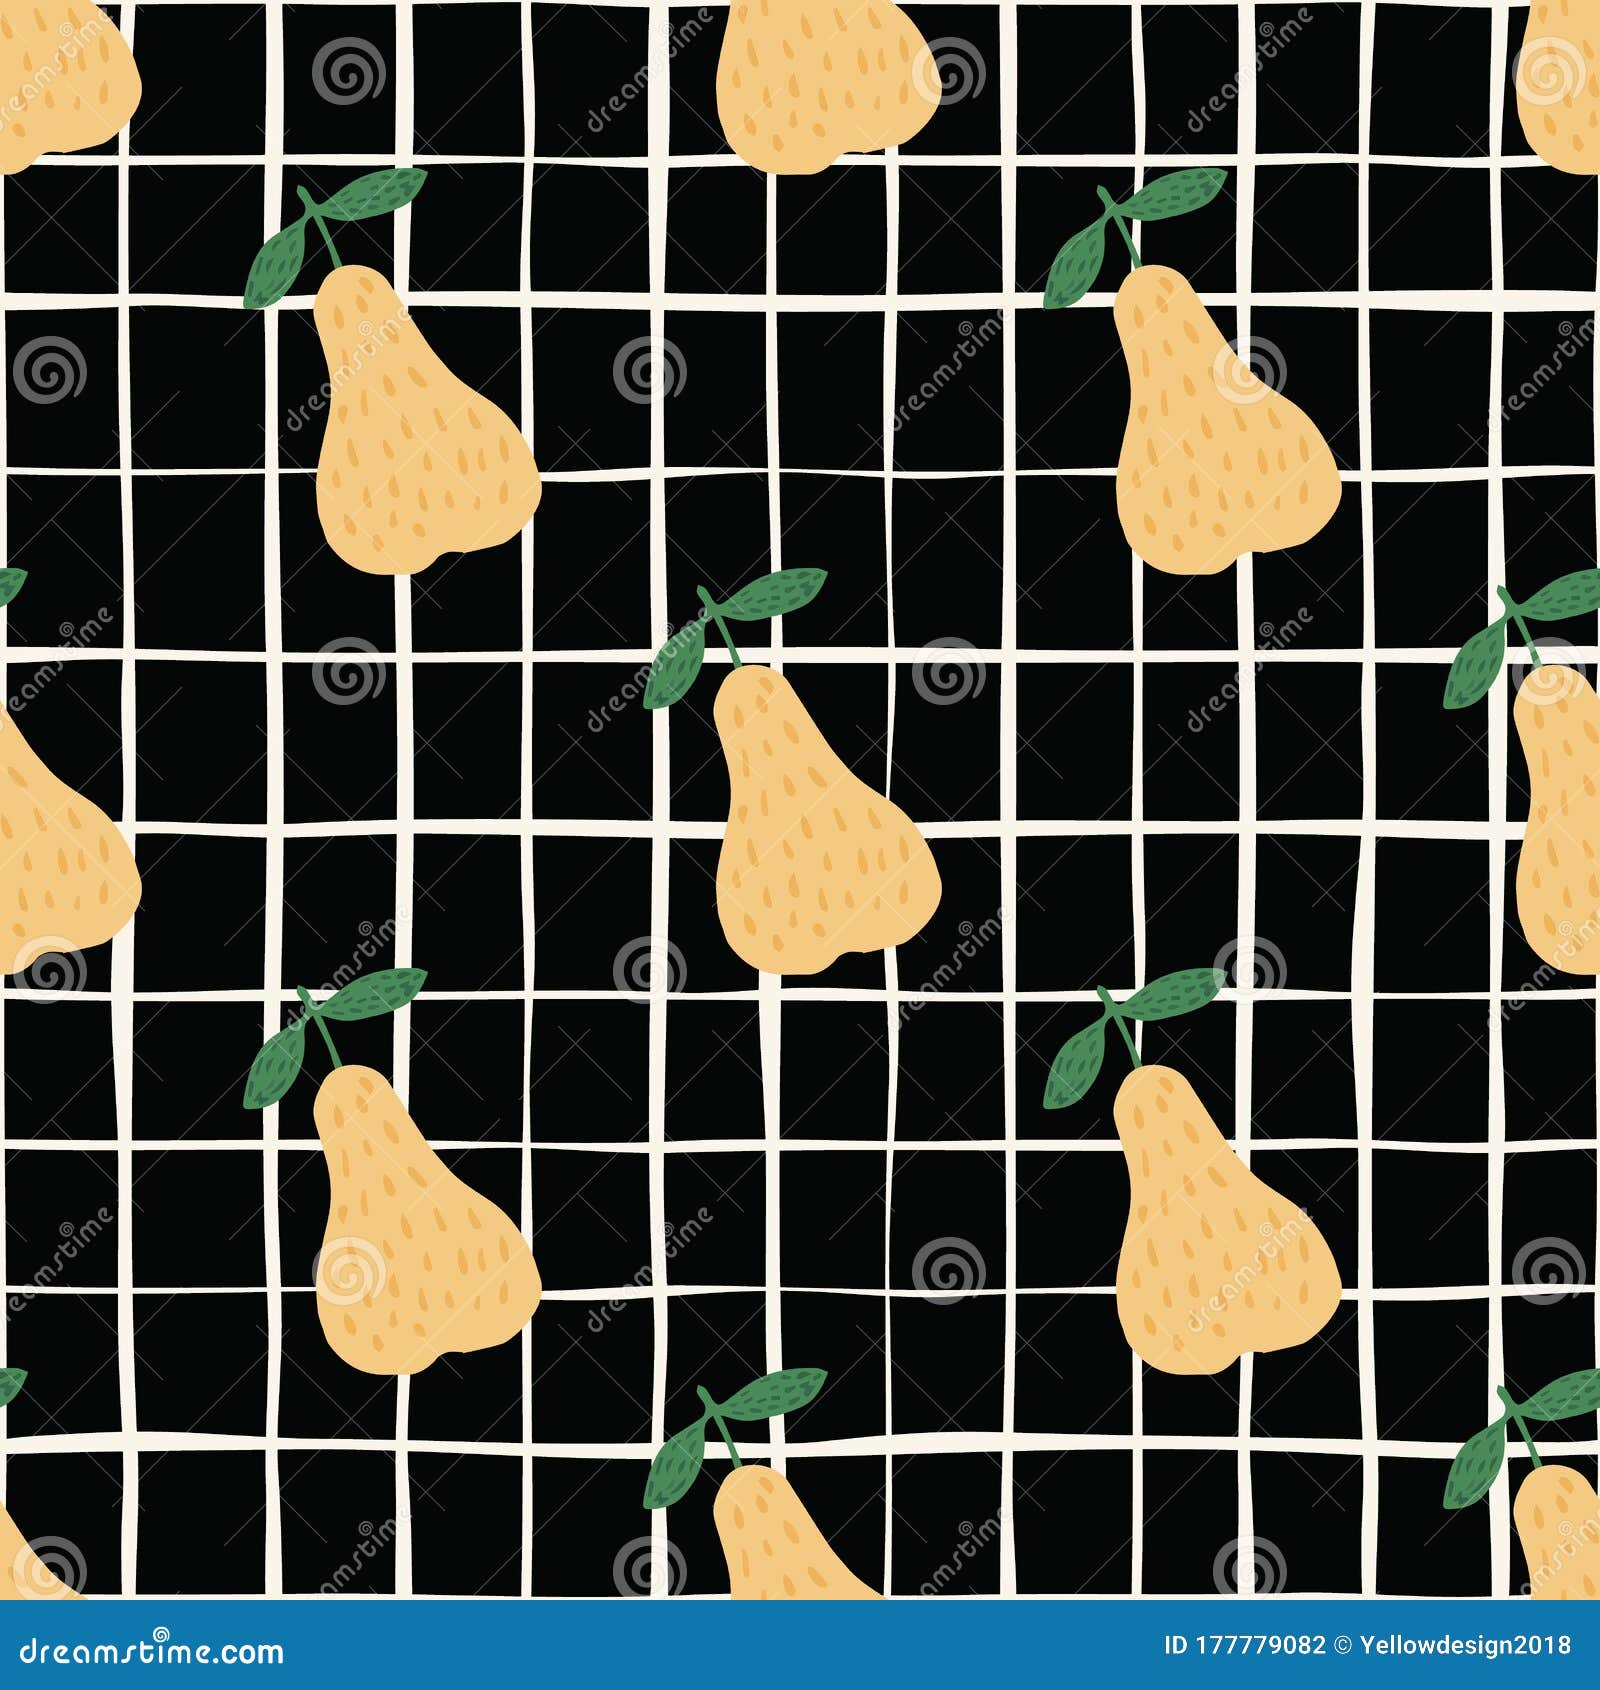 Pear background seamless pattern vector free download